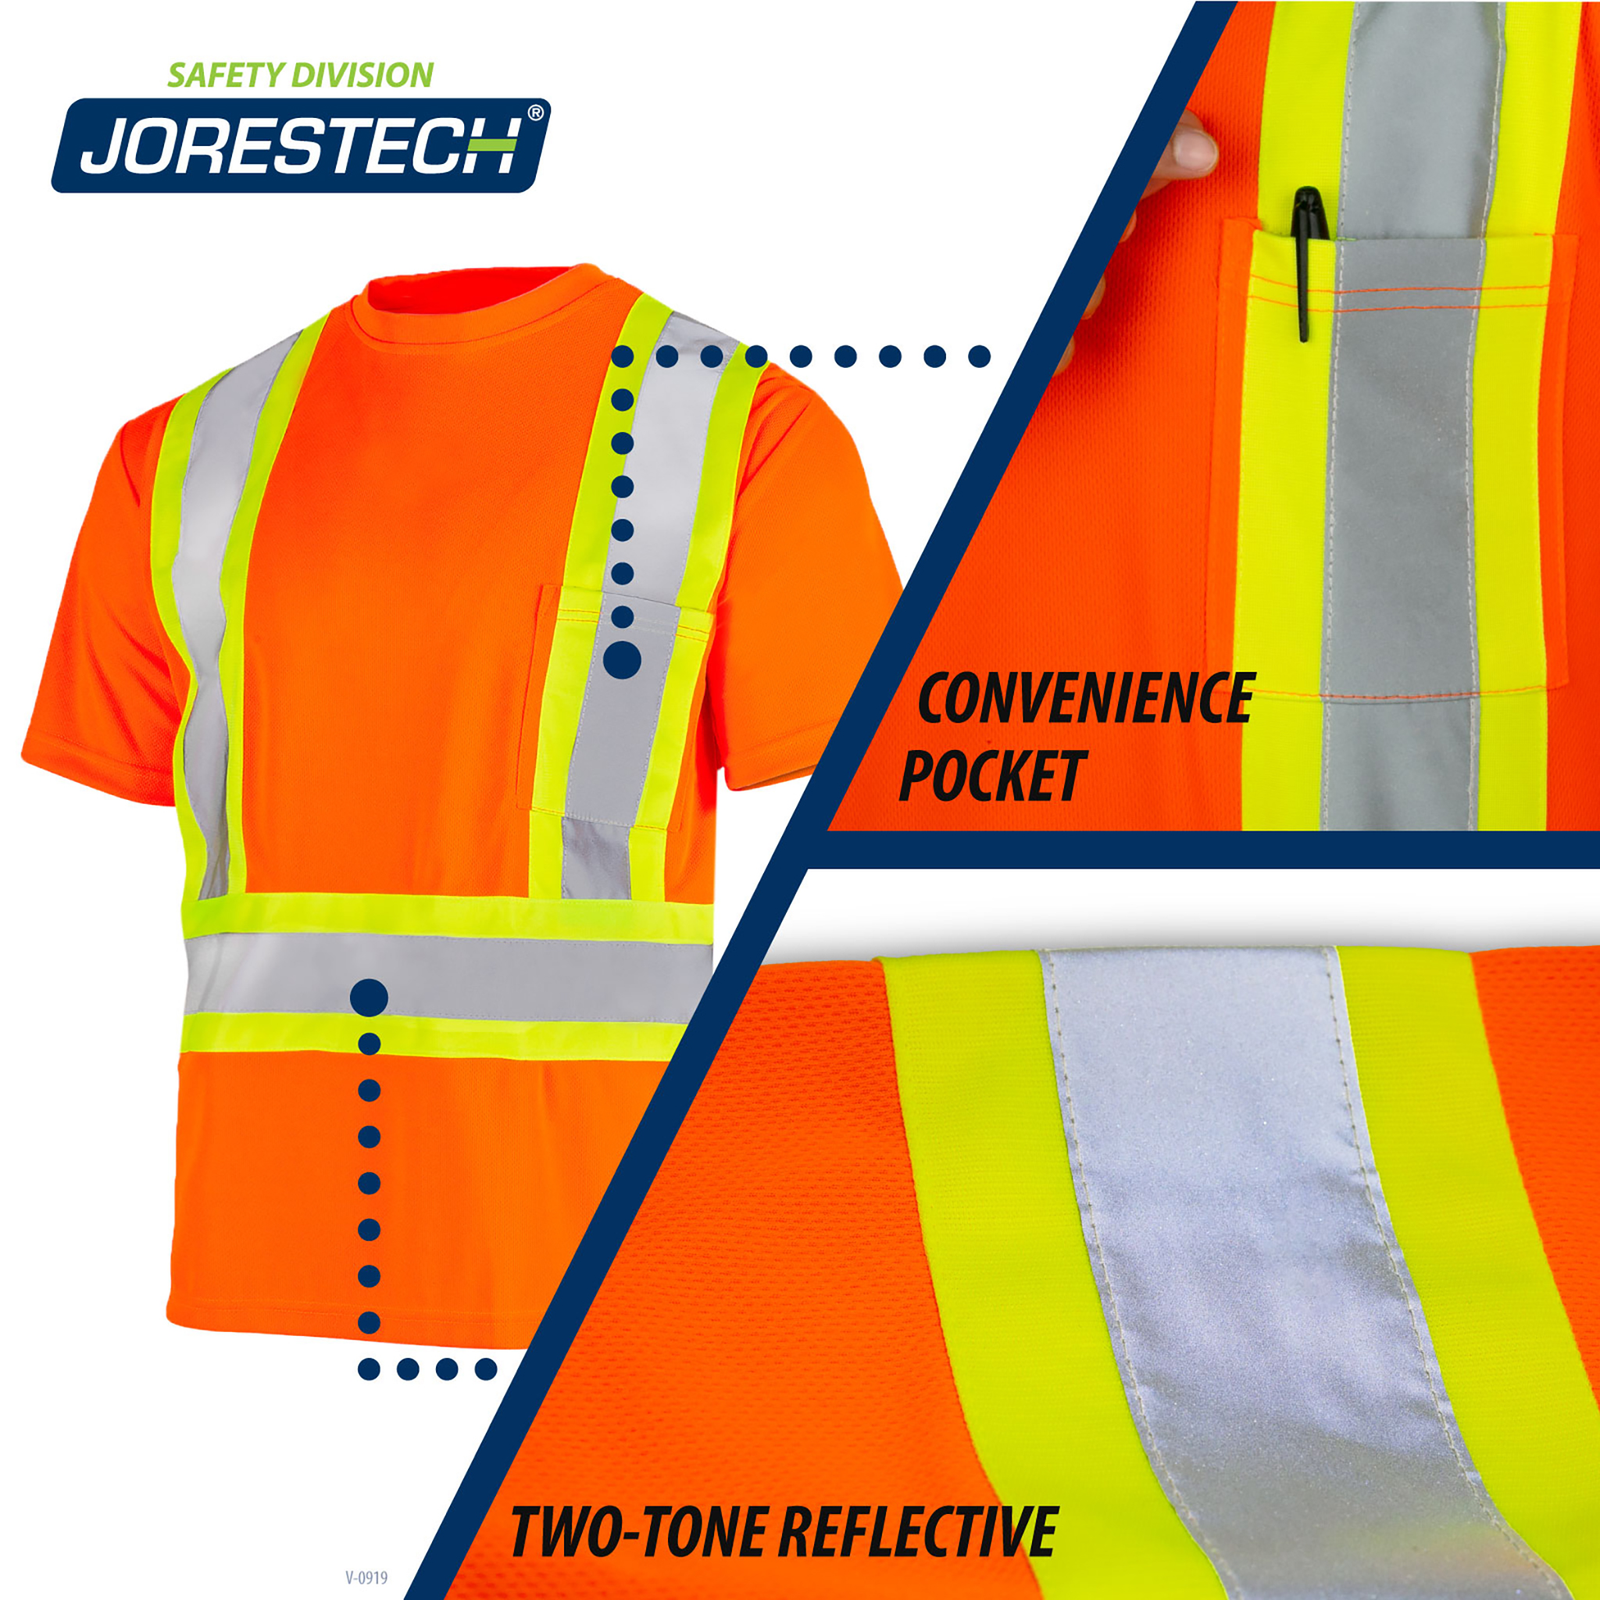 Safety shirt is shown plus 2 call outs that read: Convenience chest pocket, two tone reflective